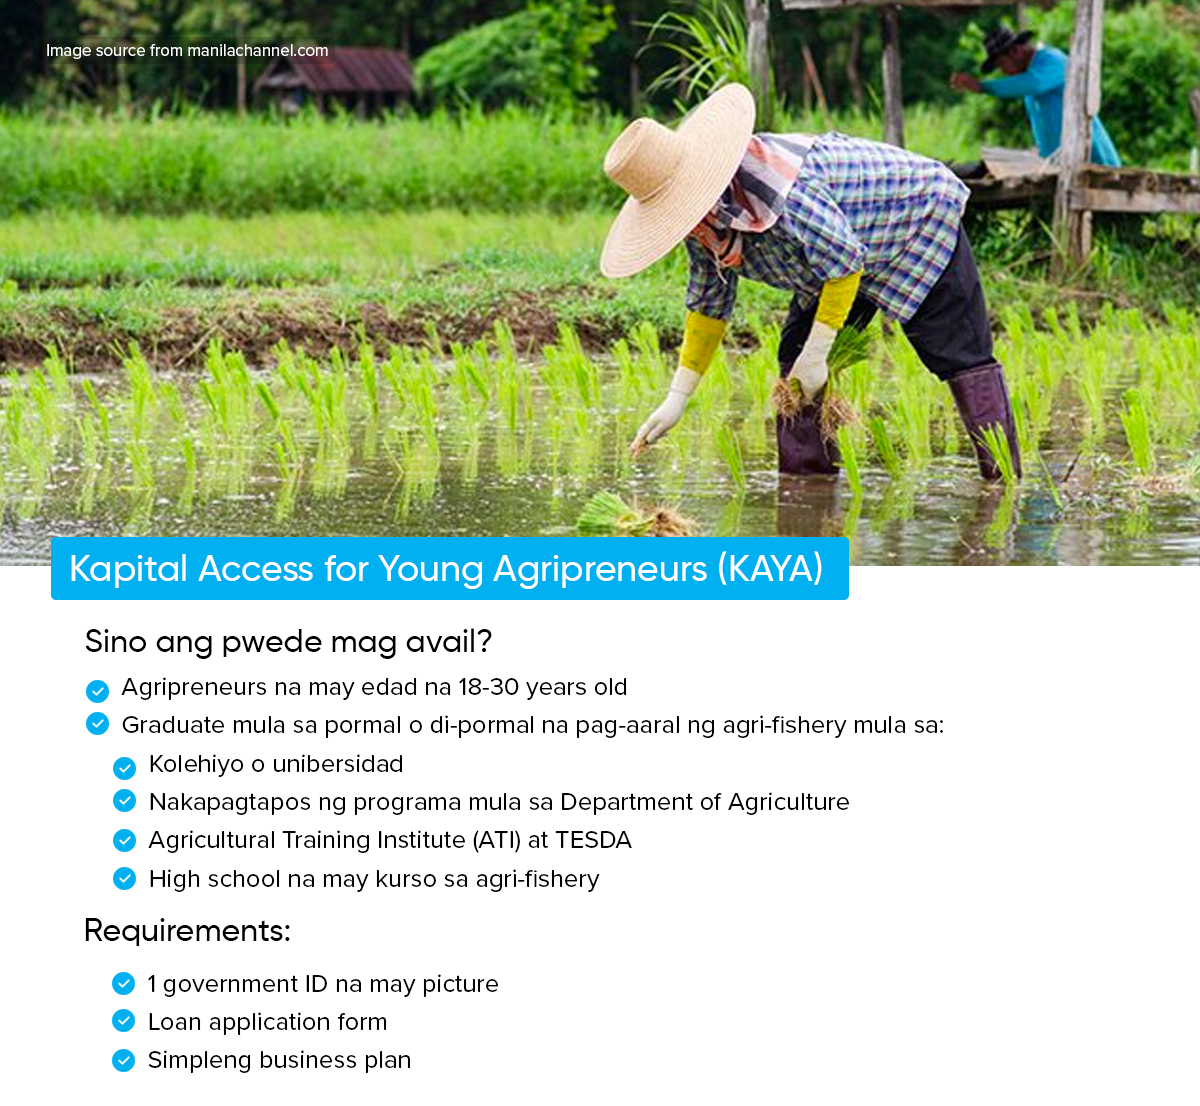 How to Apply for Kapital Access For Young Agripreneurs (KAYA)